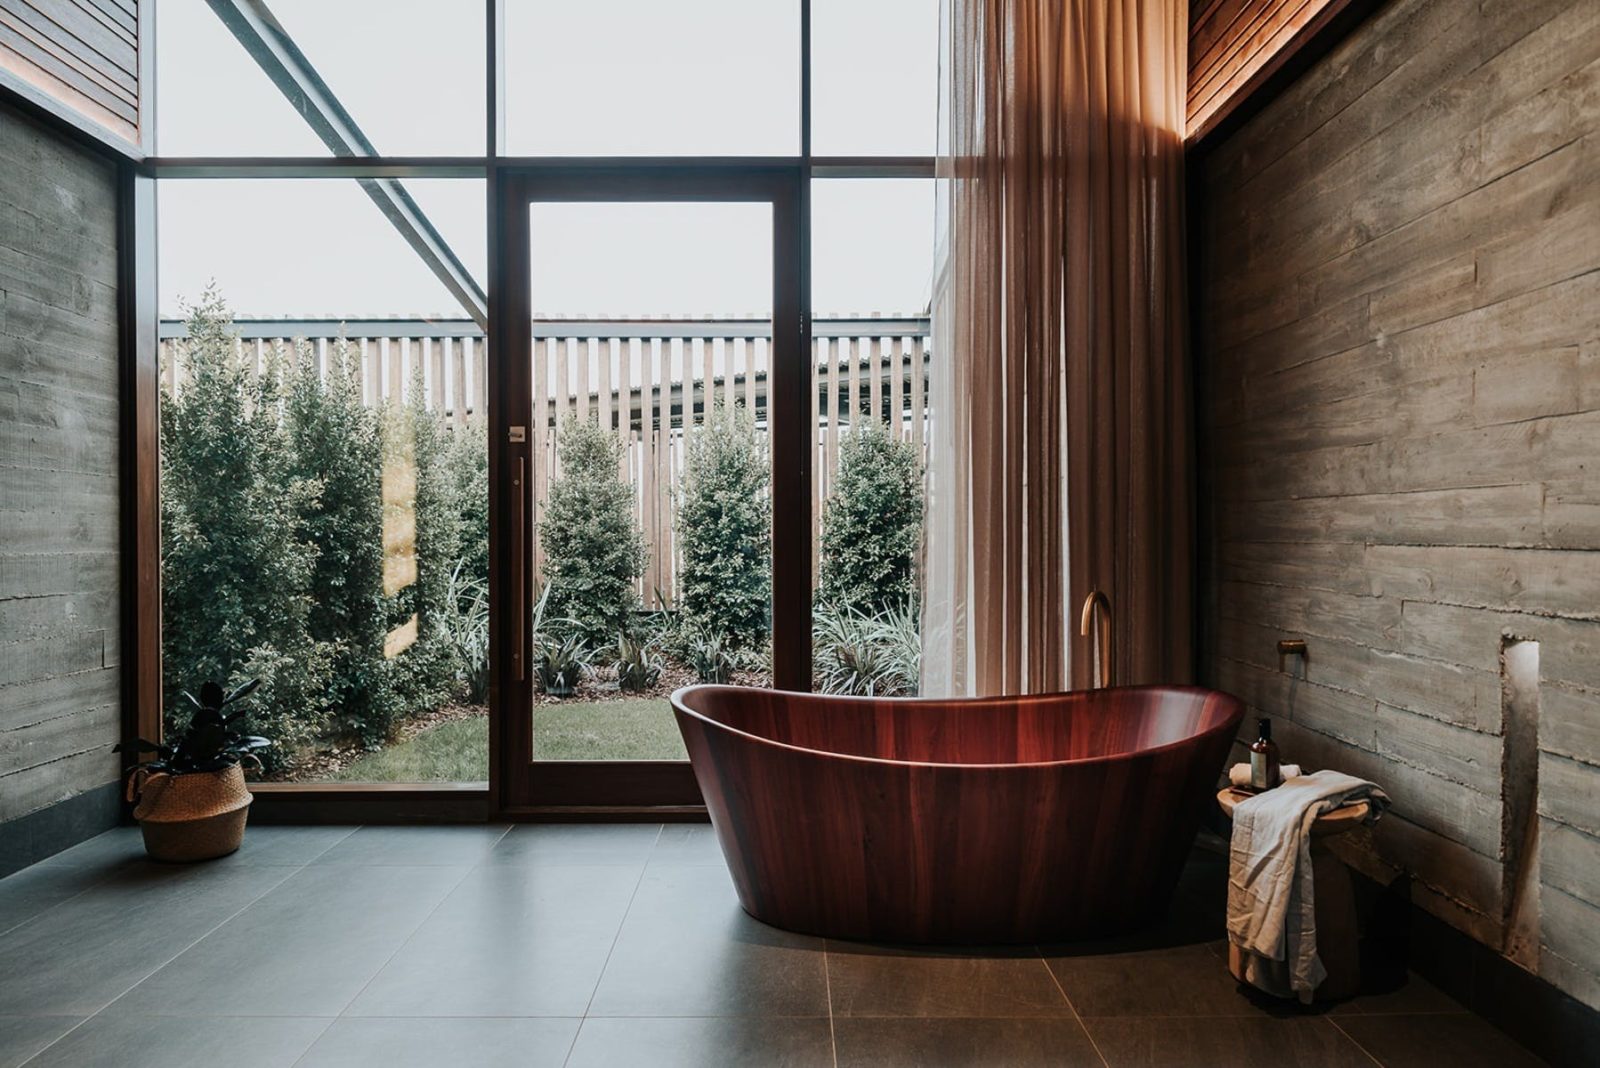 Treatment room featuring stunning red wood bath